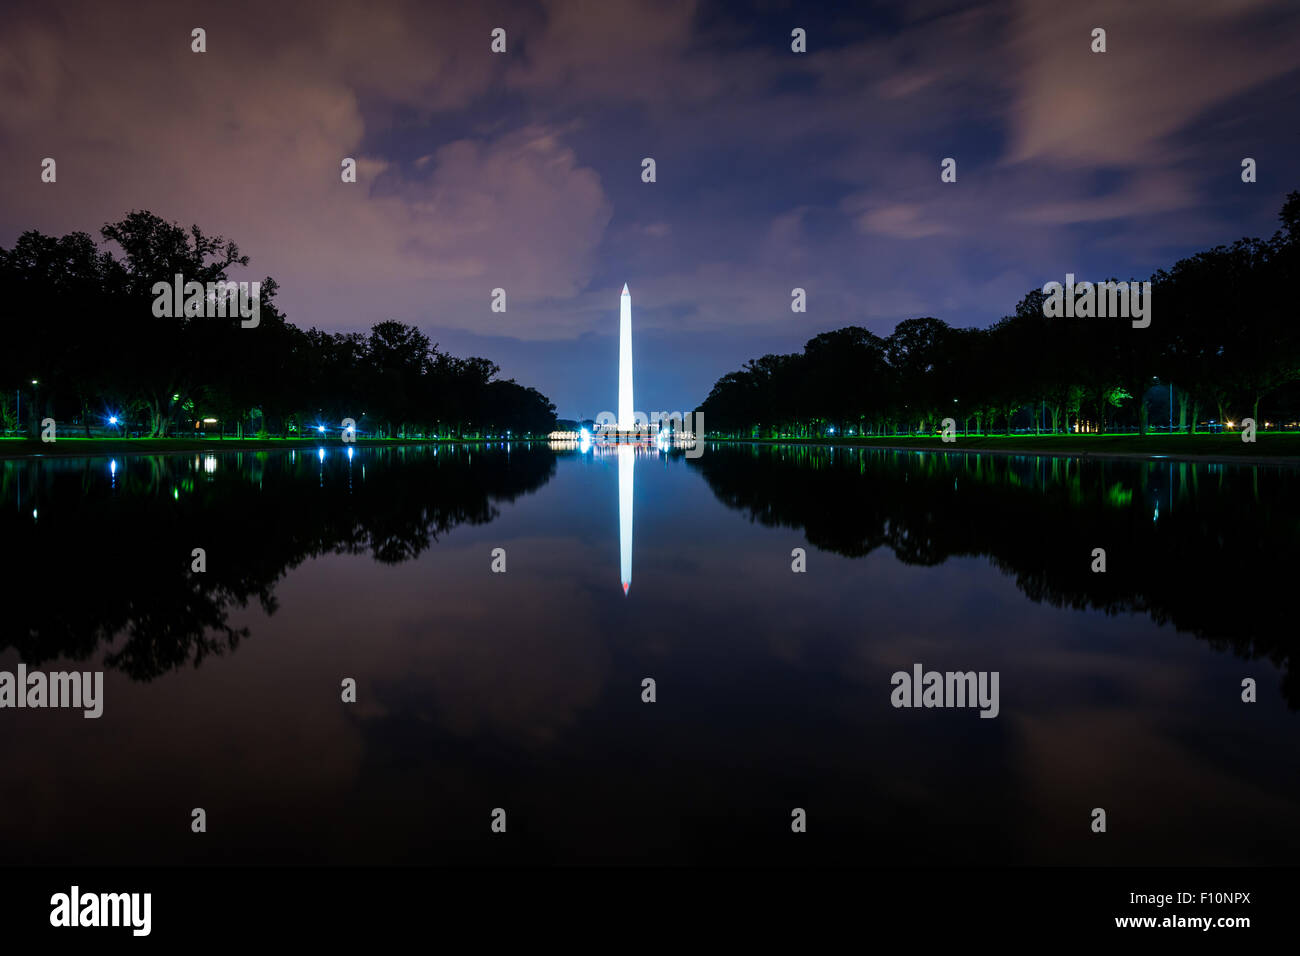 The Washington Monument and Reflecting Pool at night, at the National Mall, in Washington, DC. Stock Photo